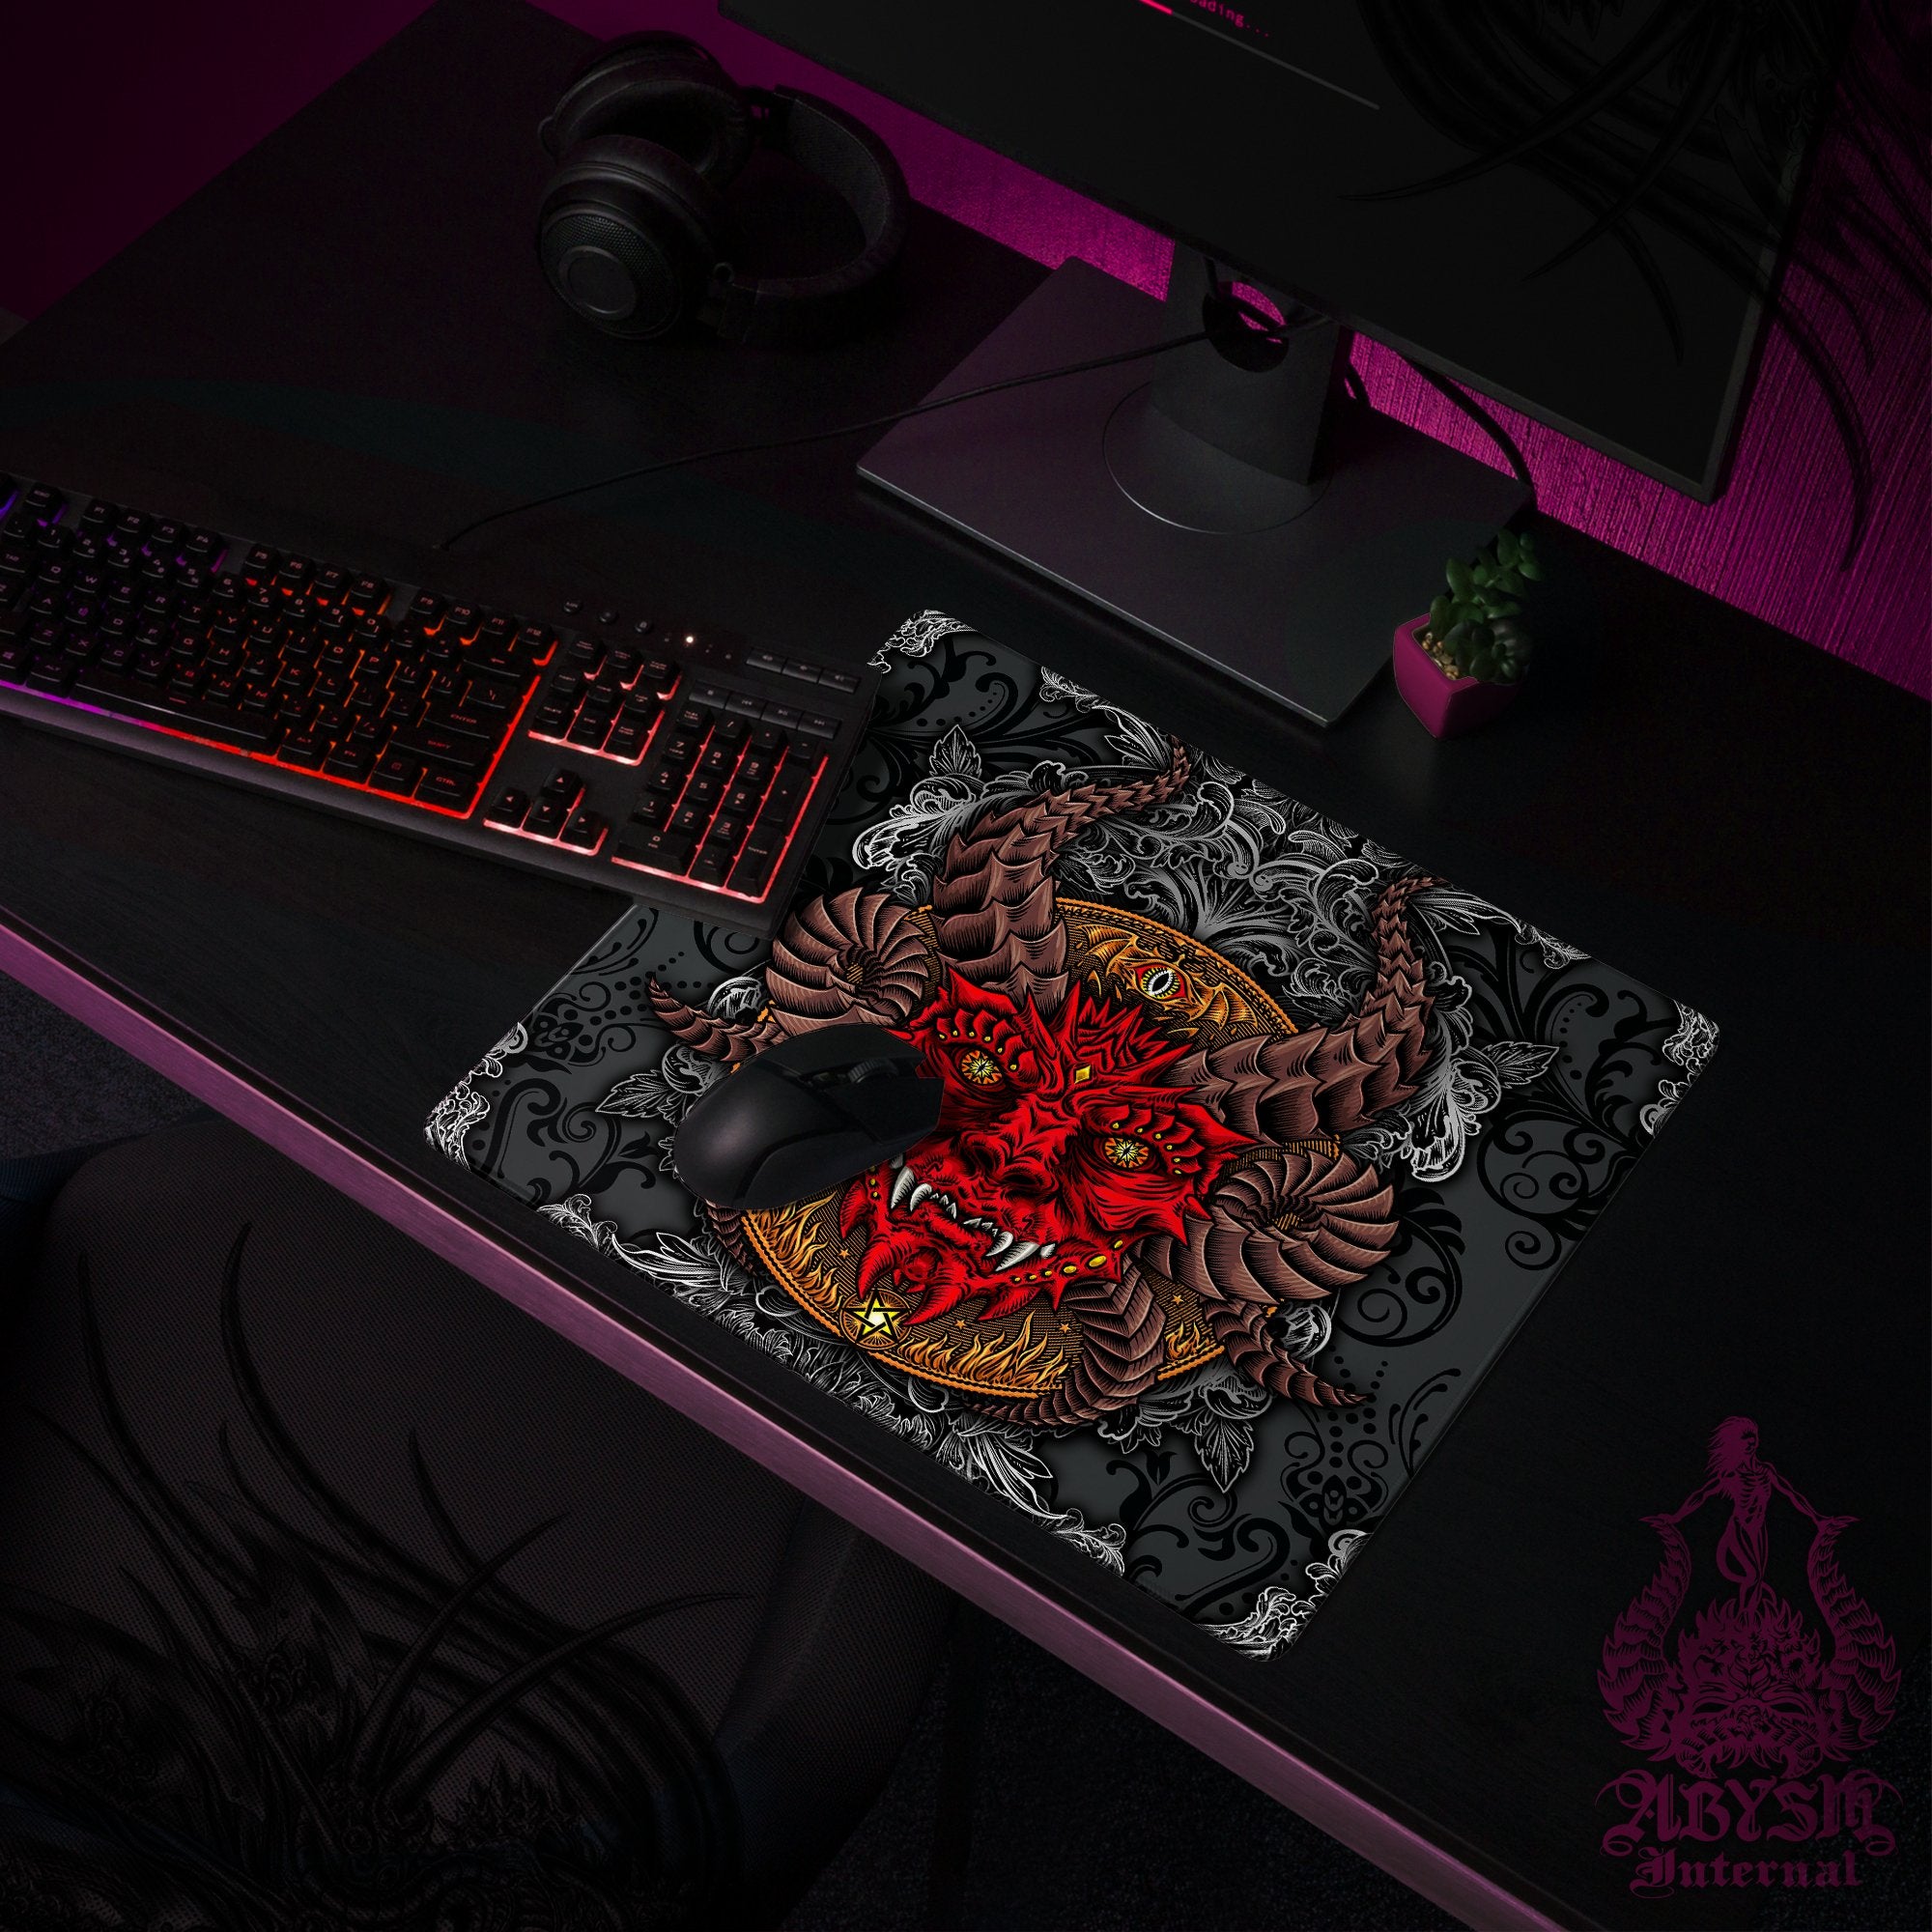 Devil Gaming Mouse Pad, Satanic Desk Mat, Demon Table Protector Cover, Lucifer Workpad, Dark Art Print - Black and Red, 2 Colors - Abysm Internal